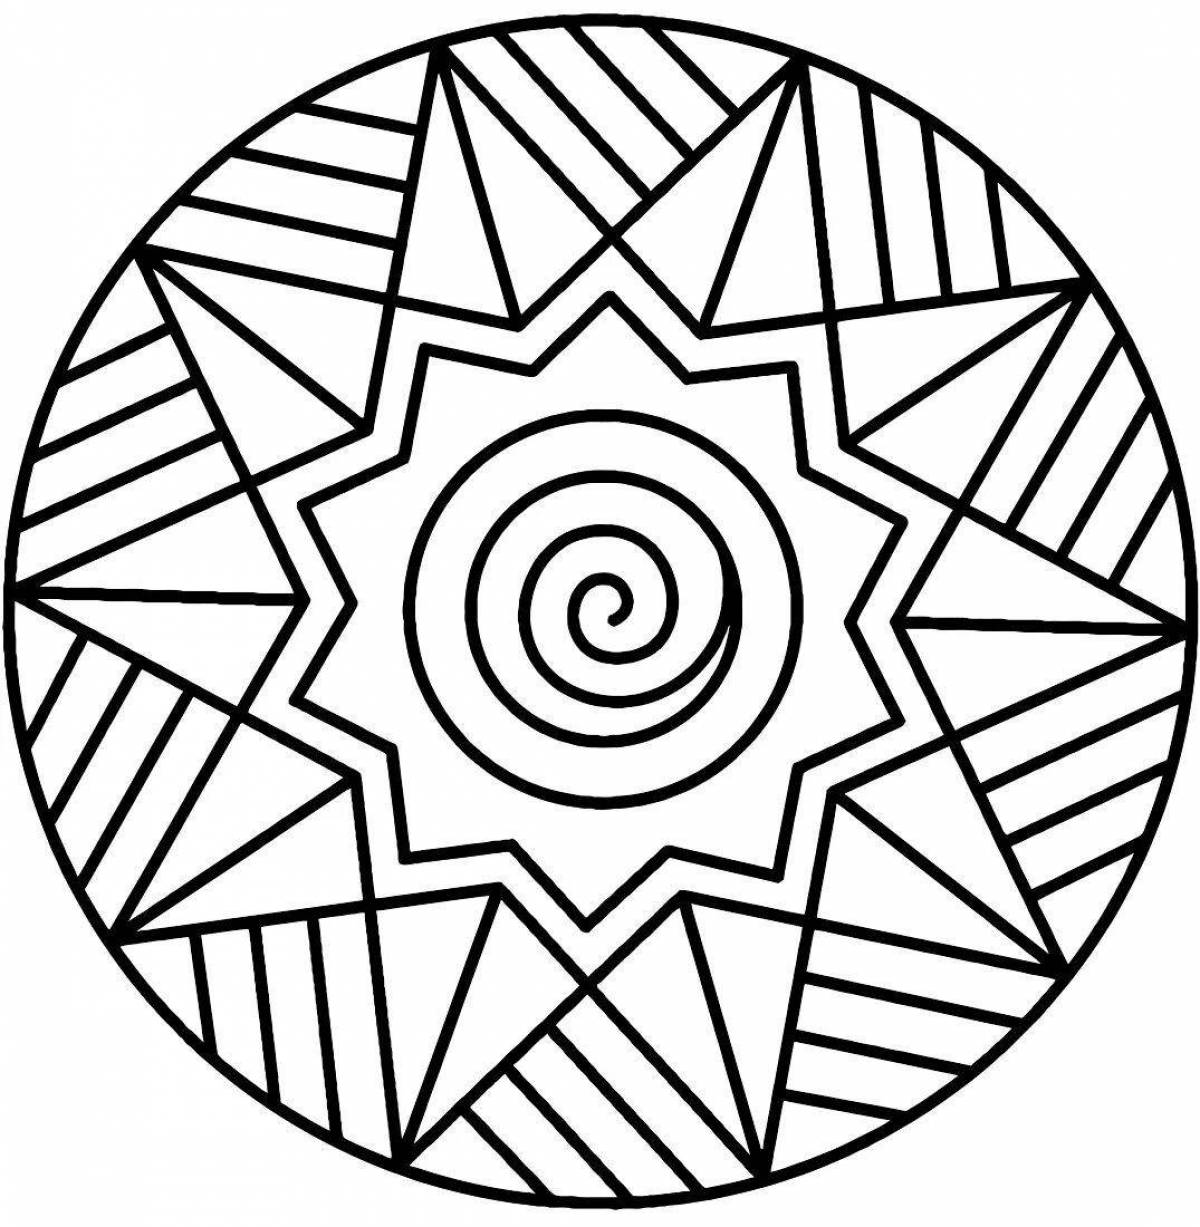 Exquisite circular pattern coloring page